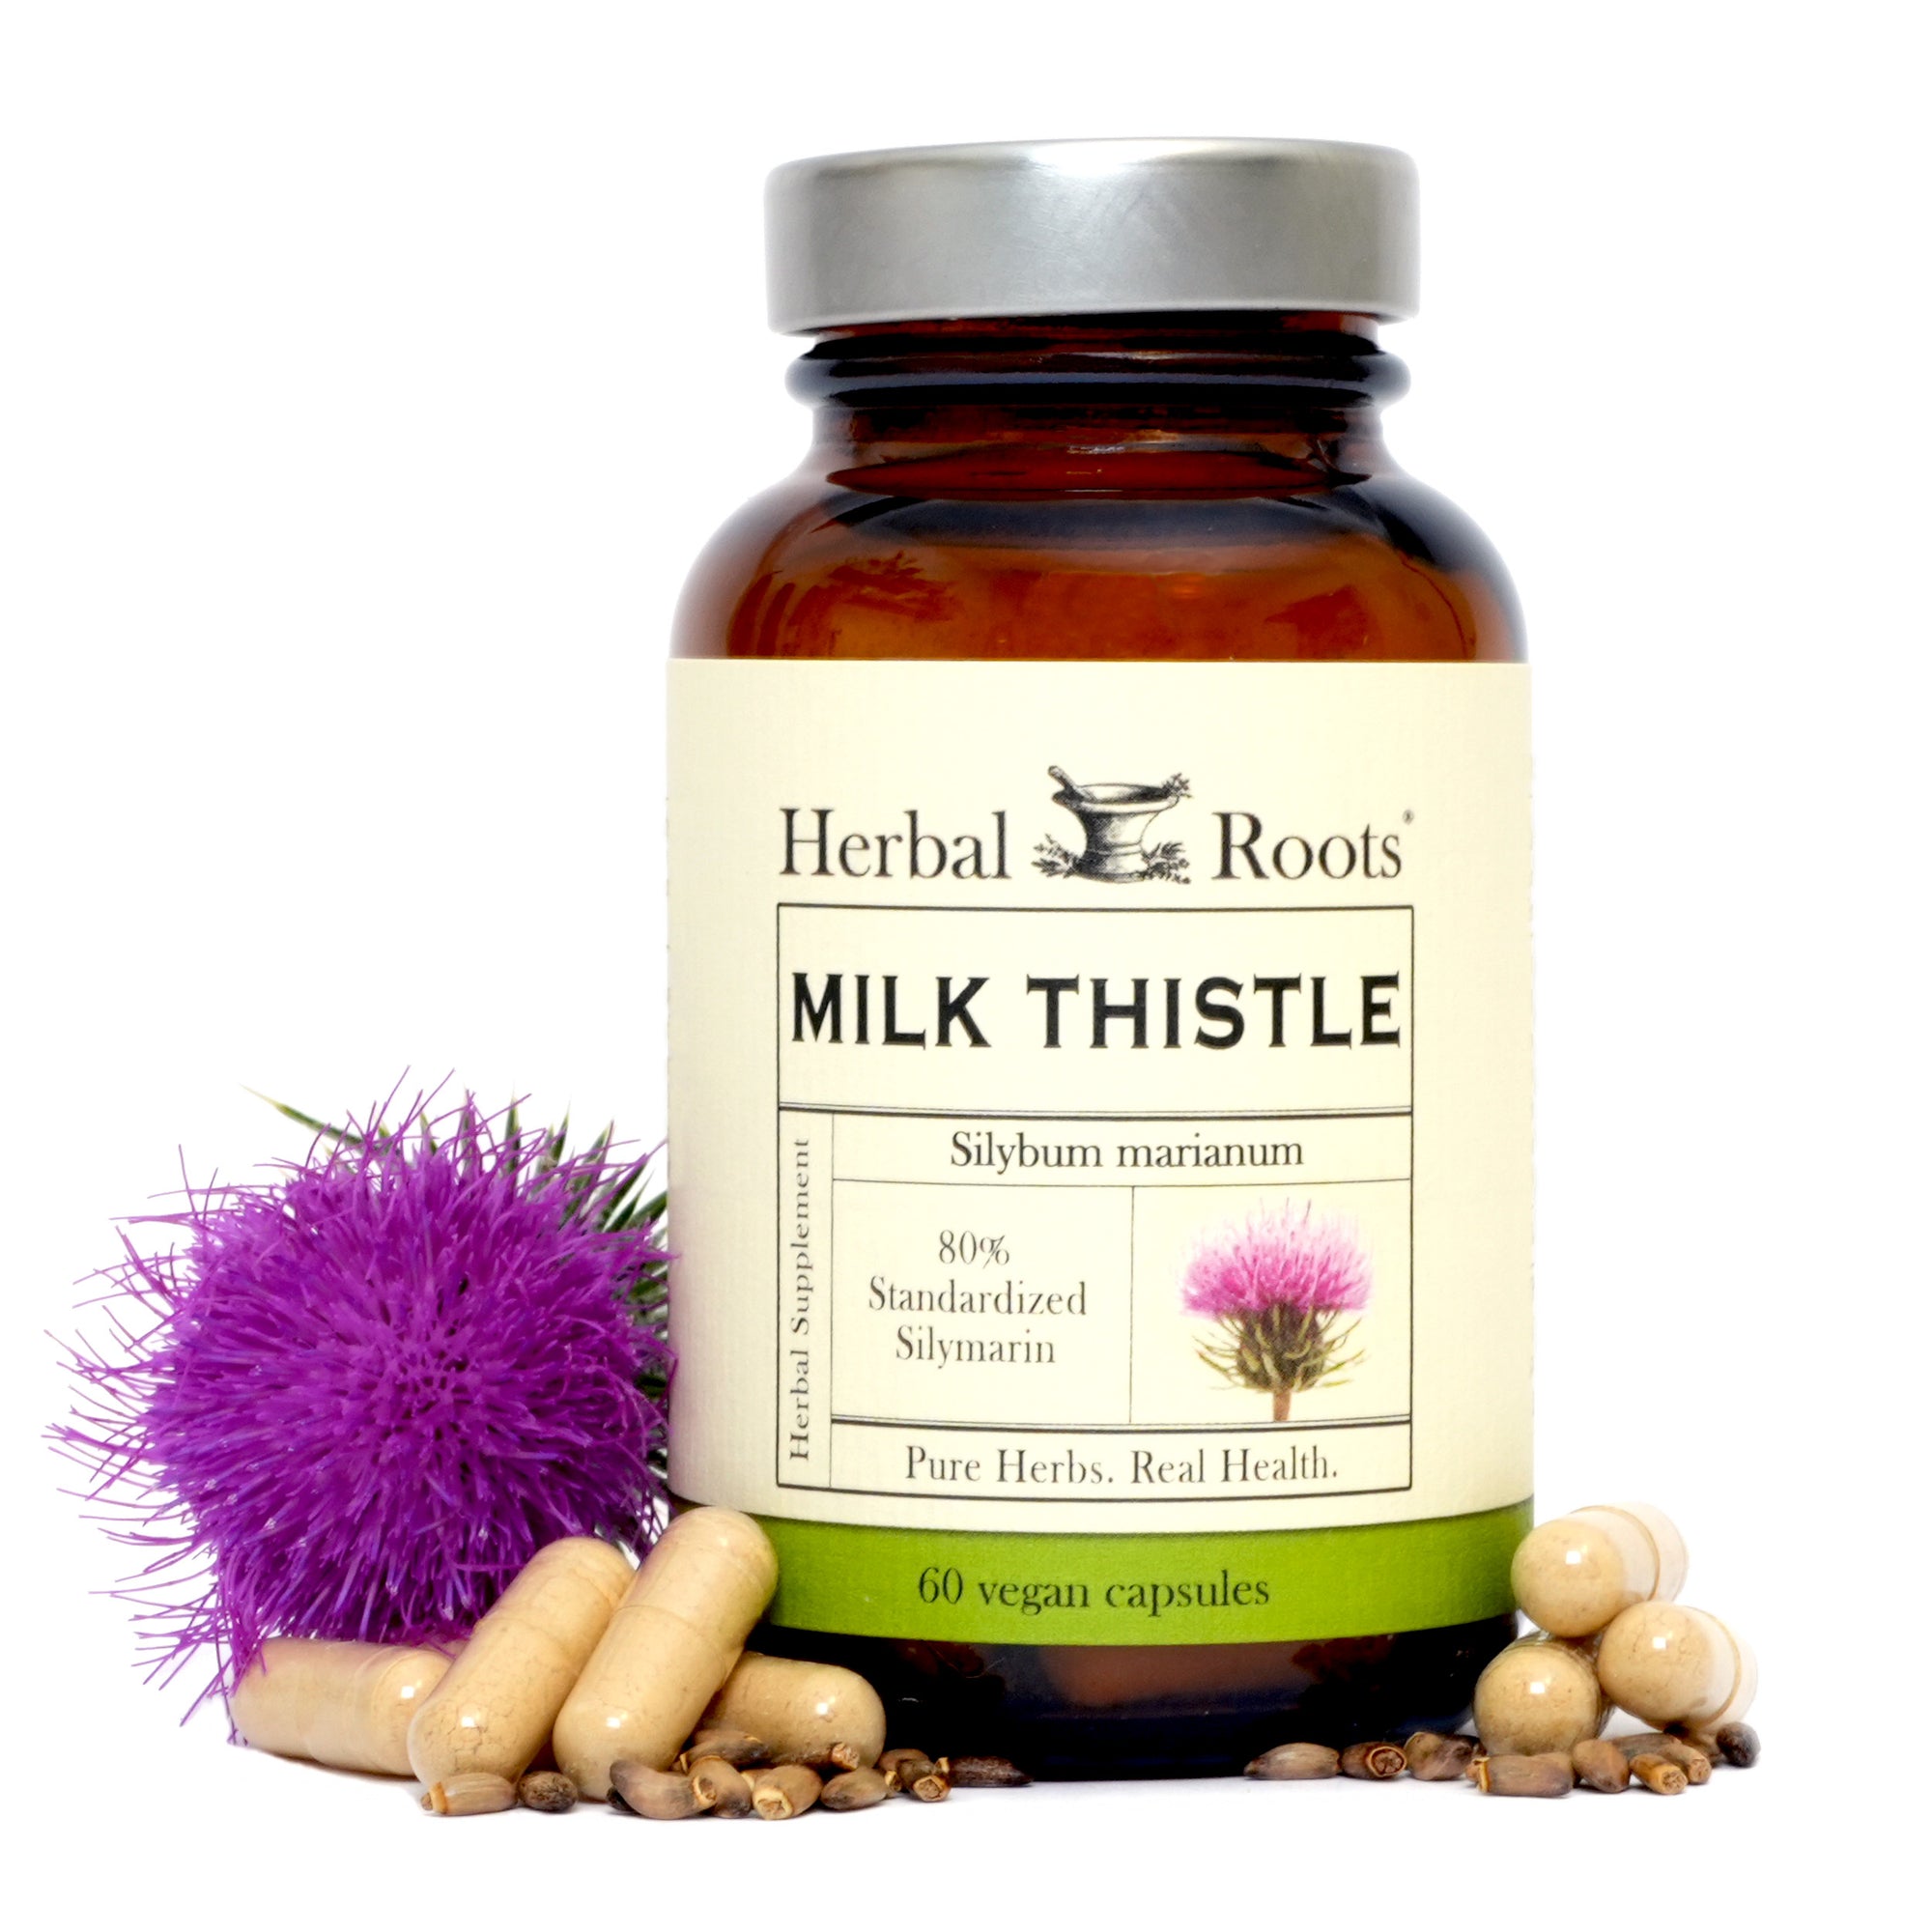 Bottle of Herbal Roots Milk Thistle with capsules and milk thistle seeds surrounding the bottle and a milk thistle flower on the left of the bottle